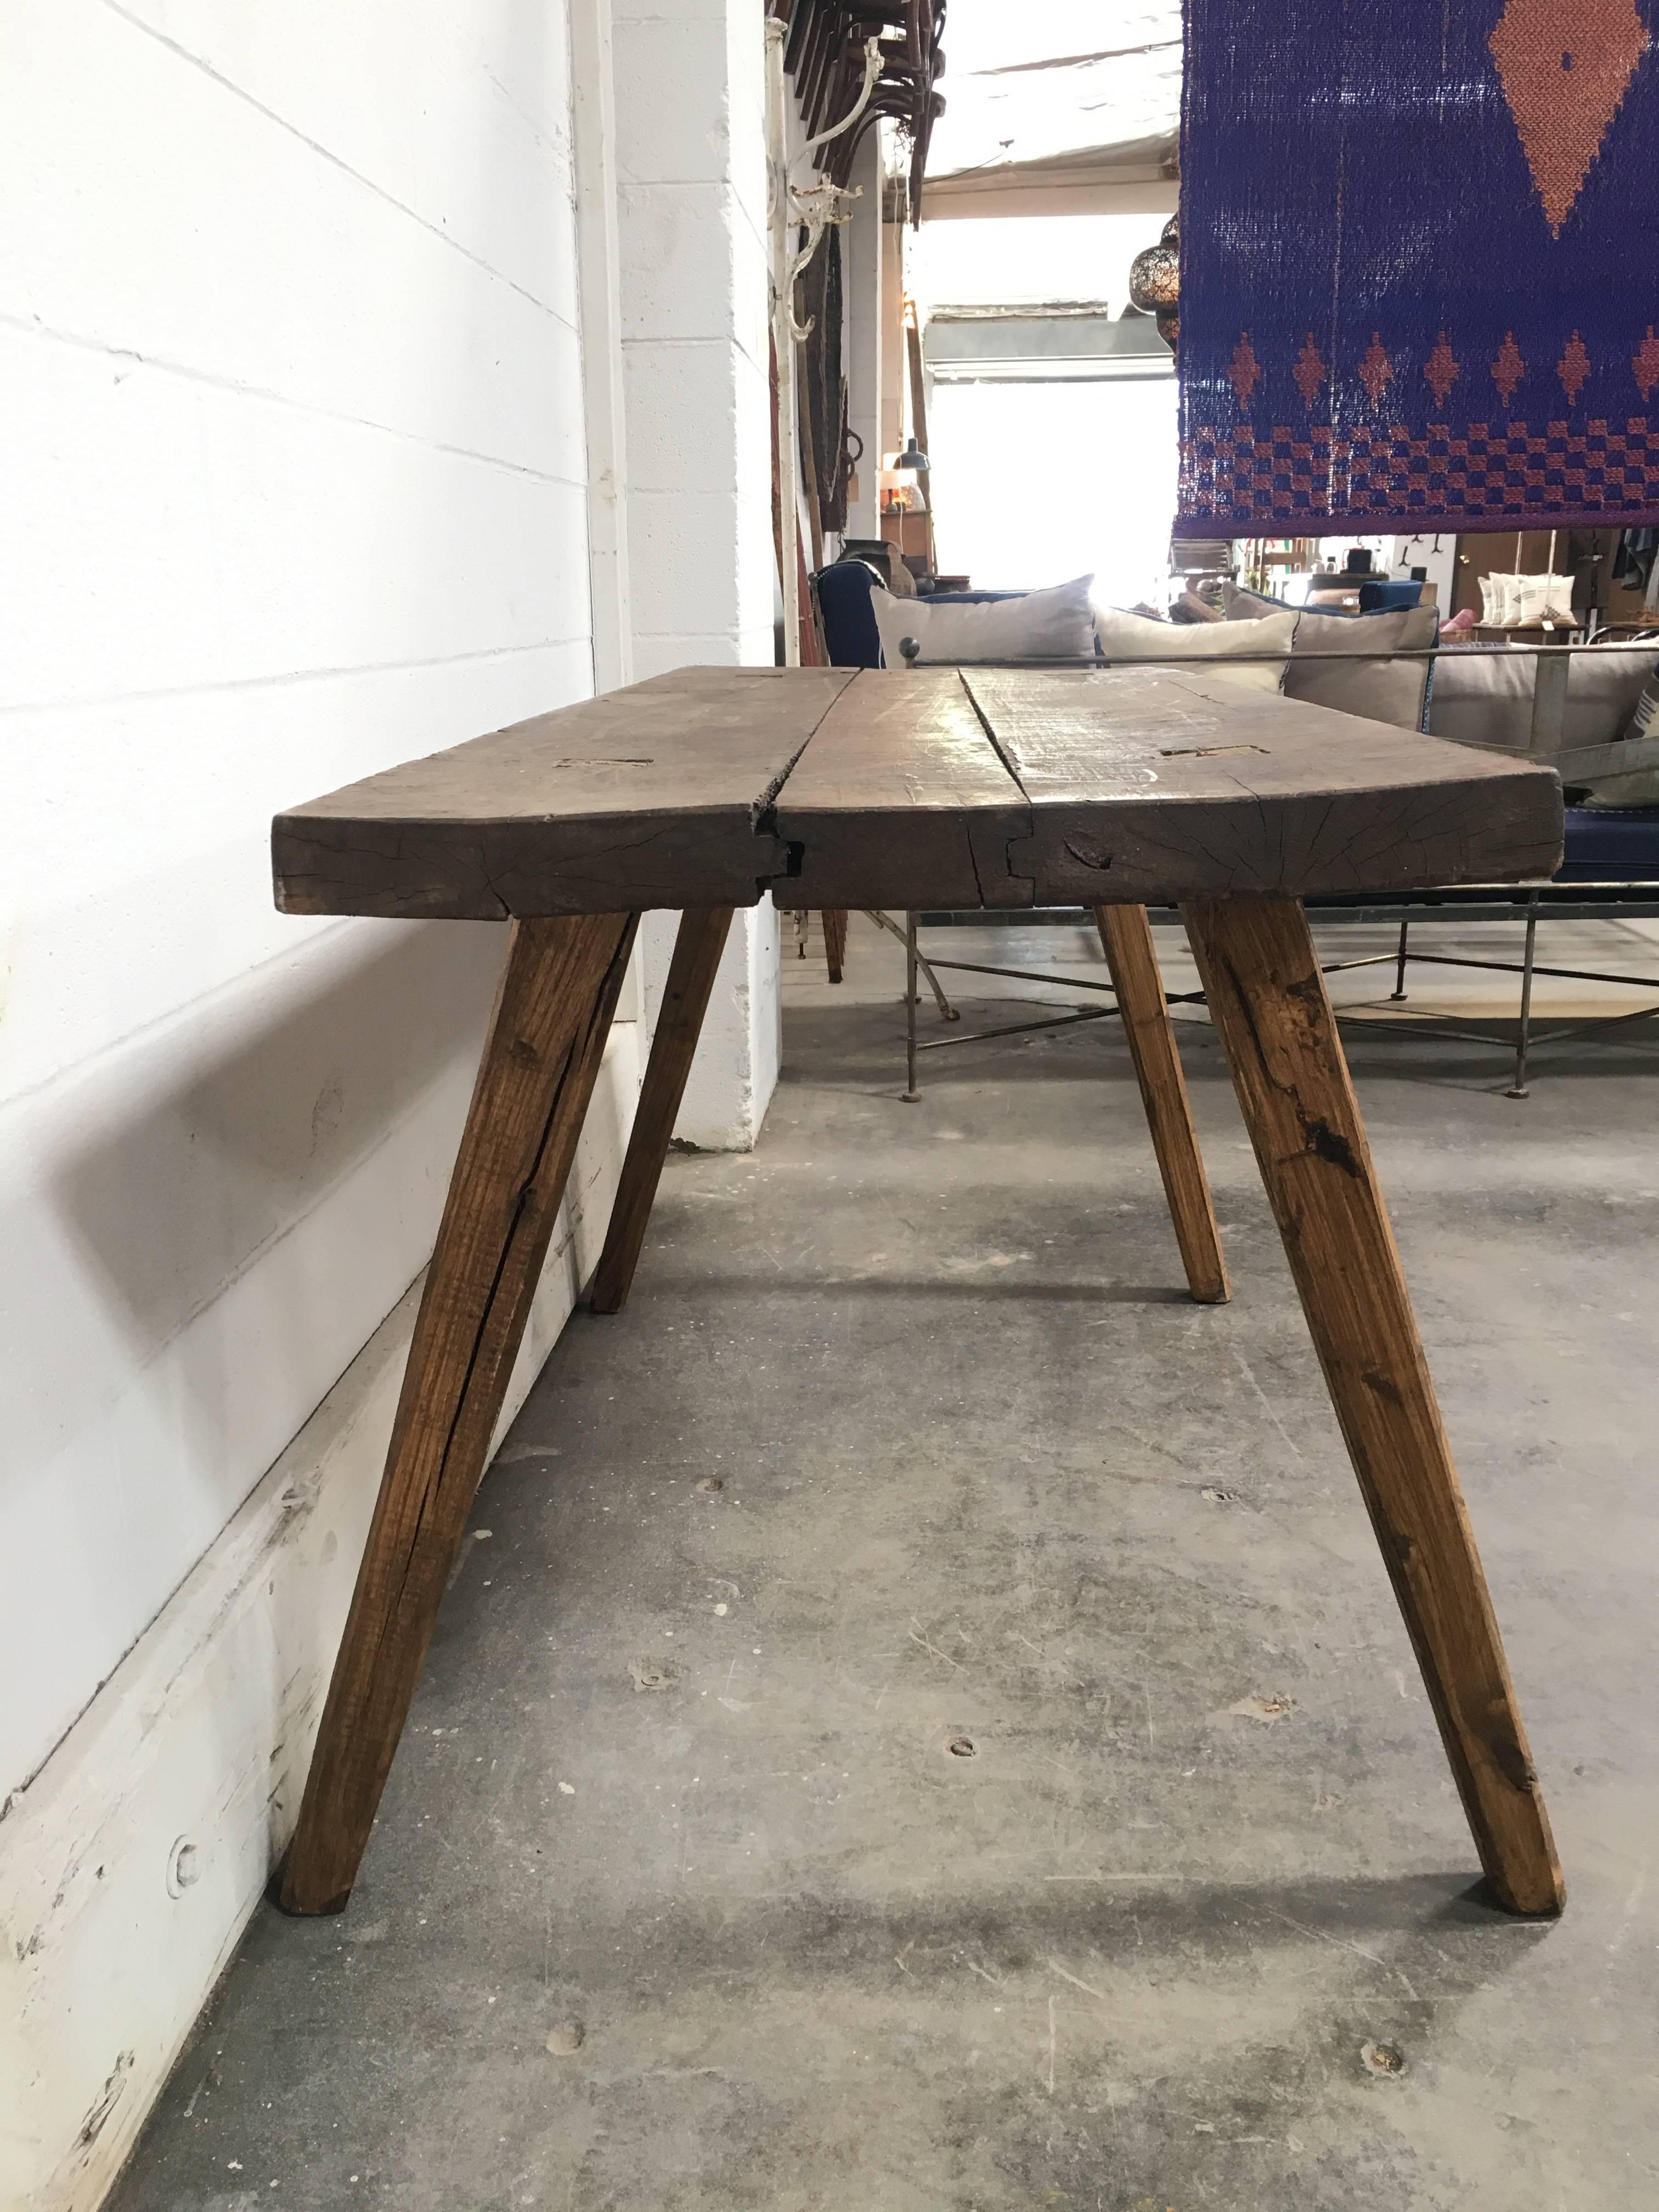 Wooden butcher block table sourced from France, very sturdy but a subtle wobble. Great for an entry console table, work desk, or kitchen island.

Width of legs at bottom is wider: making it 34